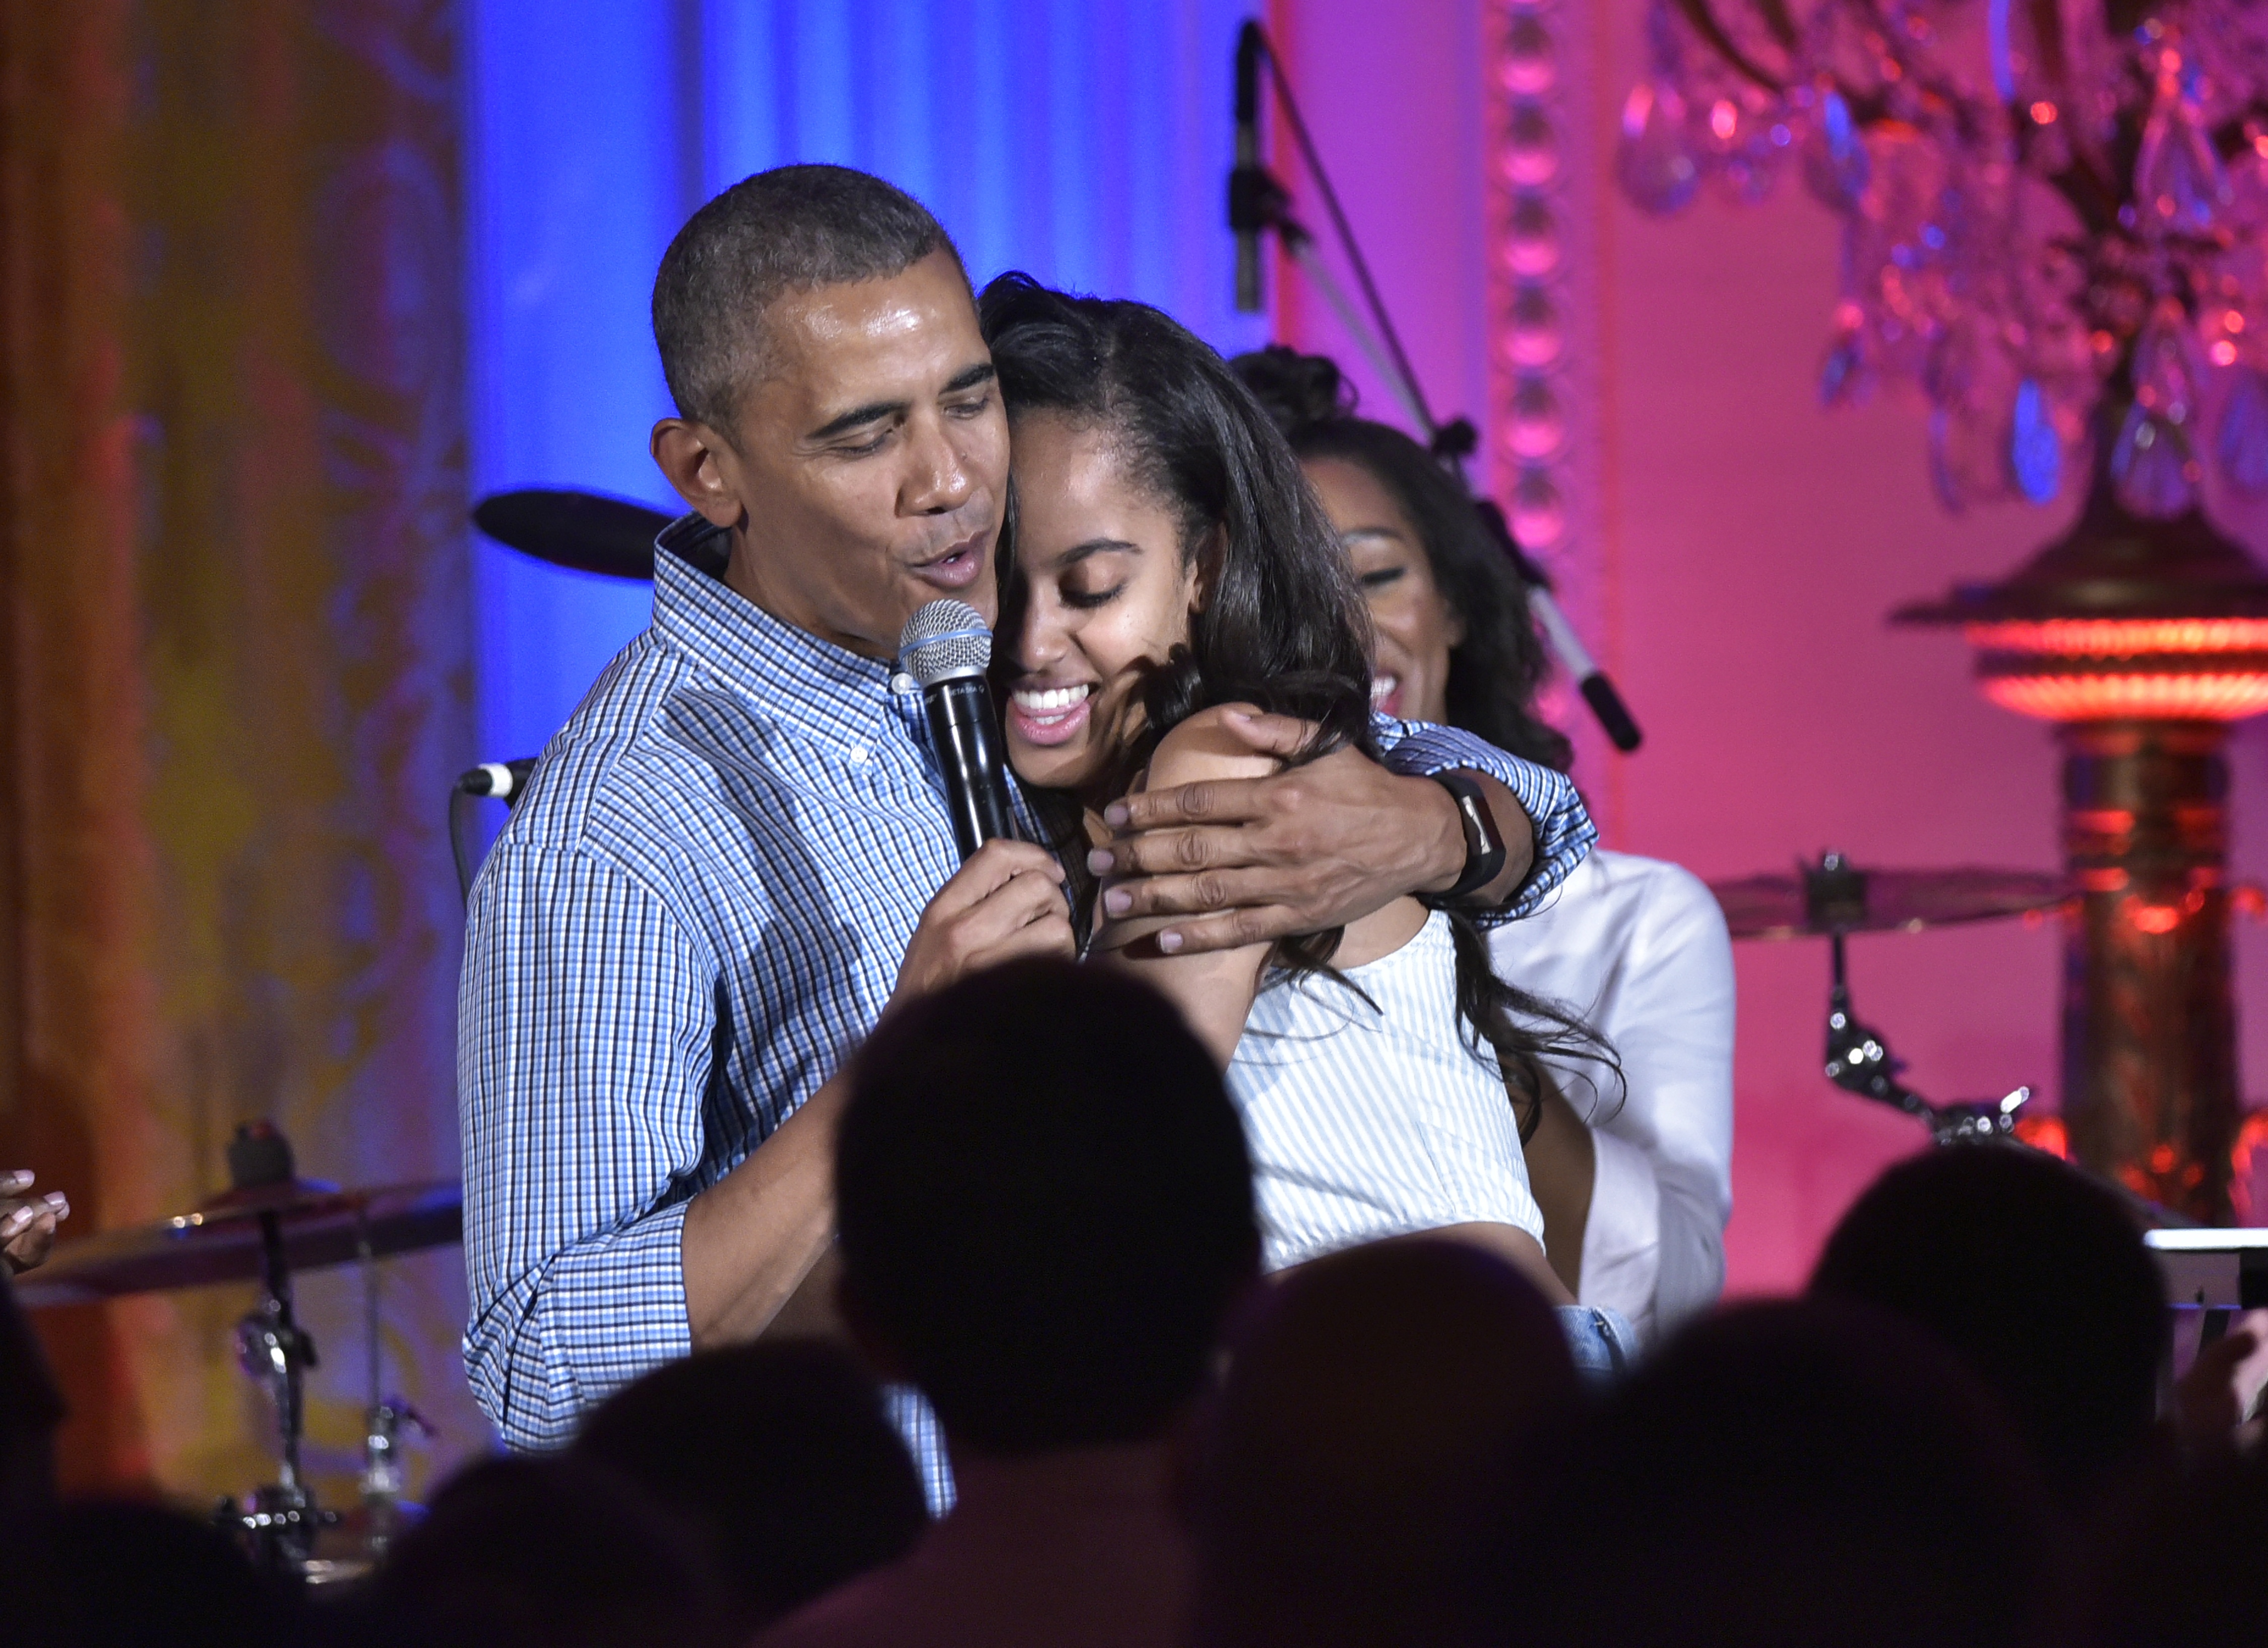 US President Barack Obama hugs his daughter Malia on her birthday during an Independence Day Celebration for military members and administration staff on July 4, 2016 in the East Room of the White House in Washington, DC. / AFP PHOTO / Mandel Ngan